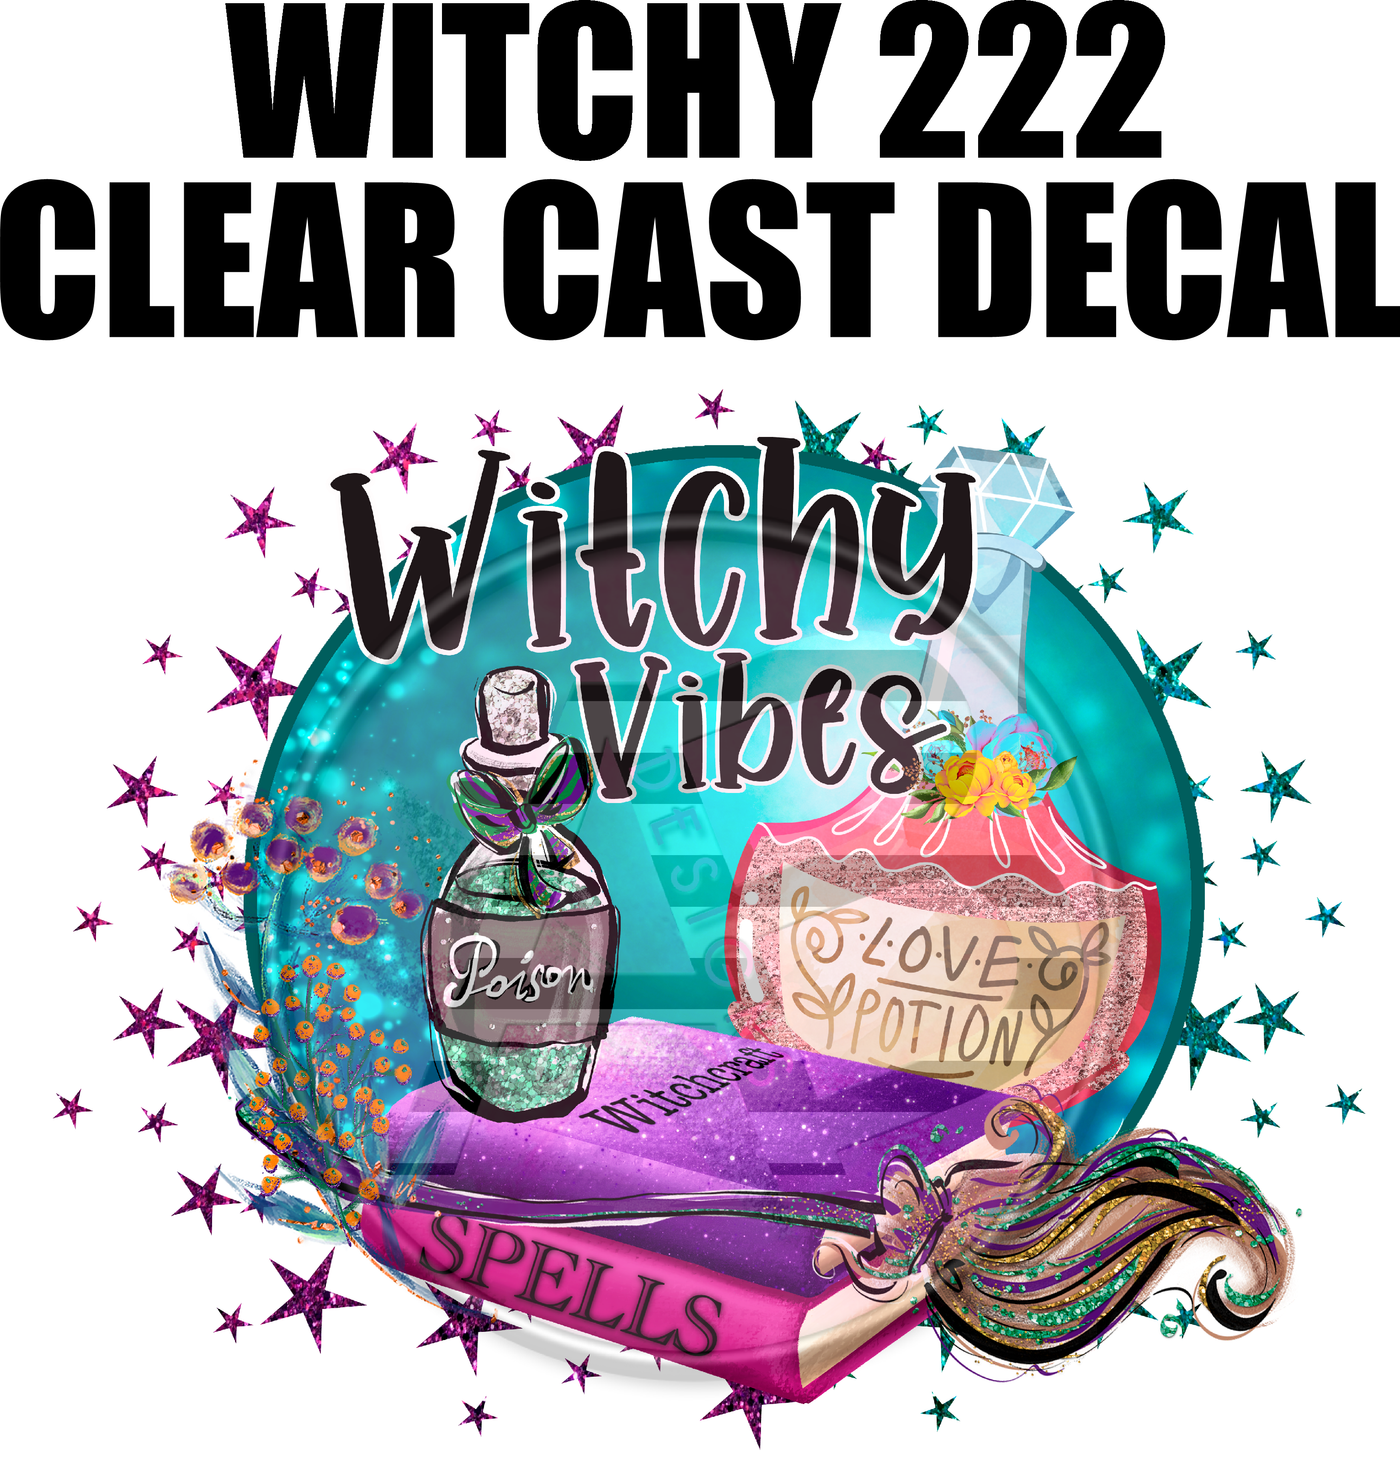 Witchy 222 - Clear Cast Decal